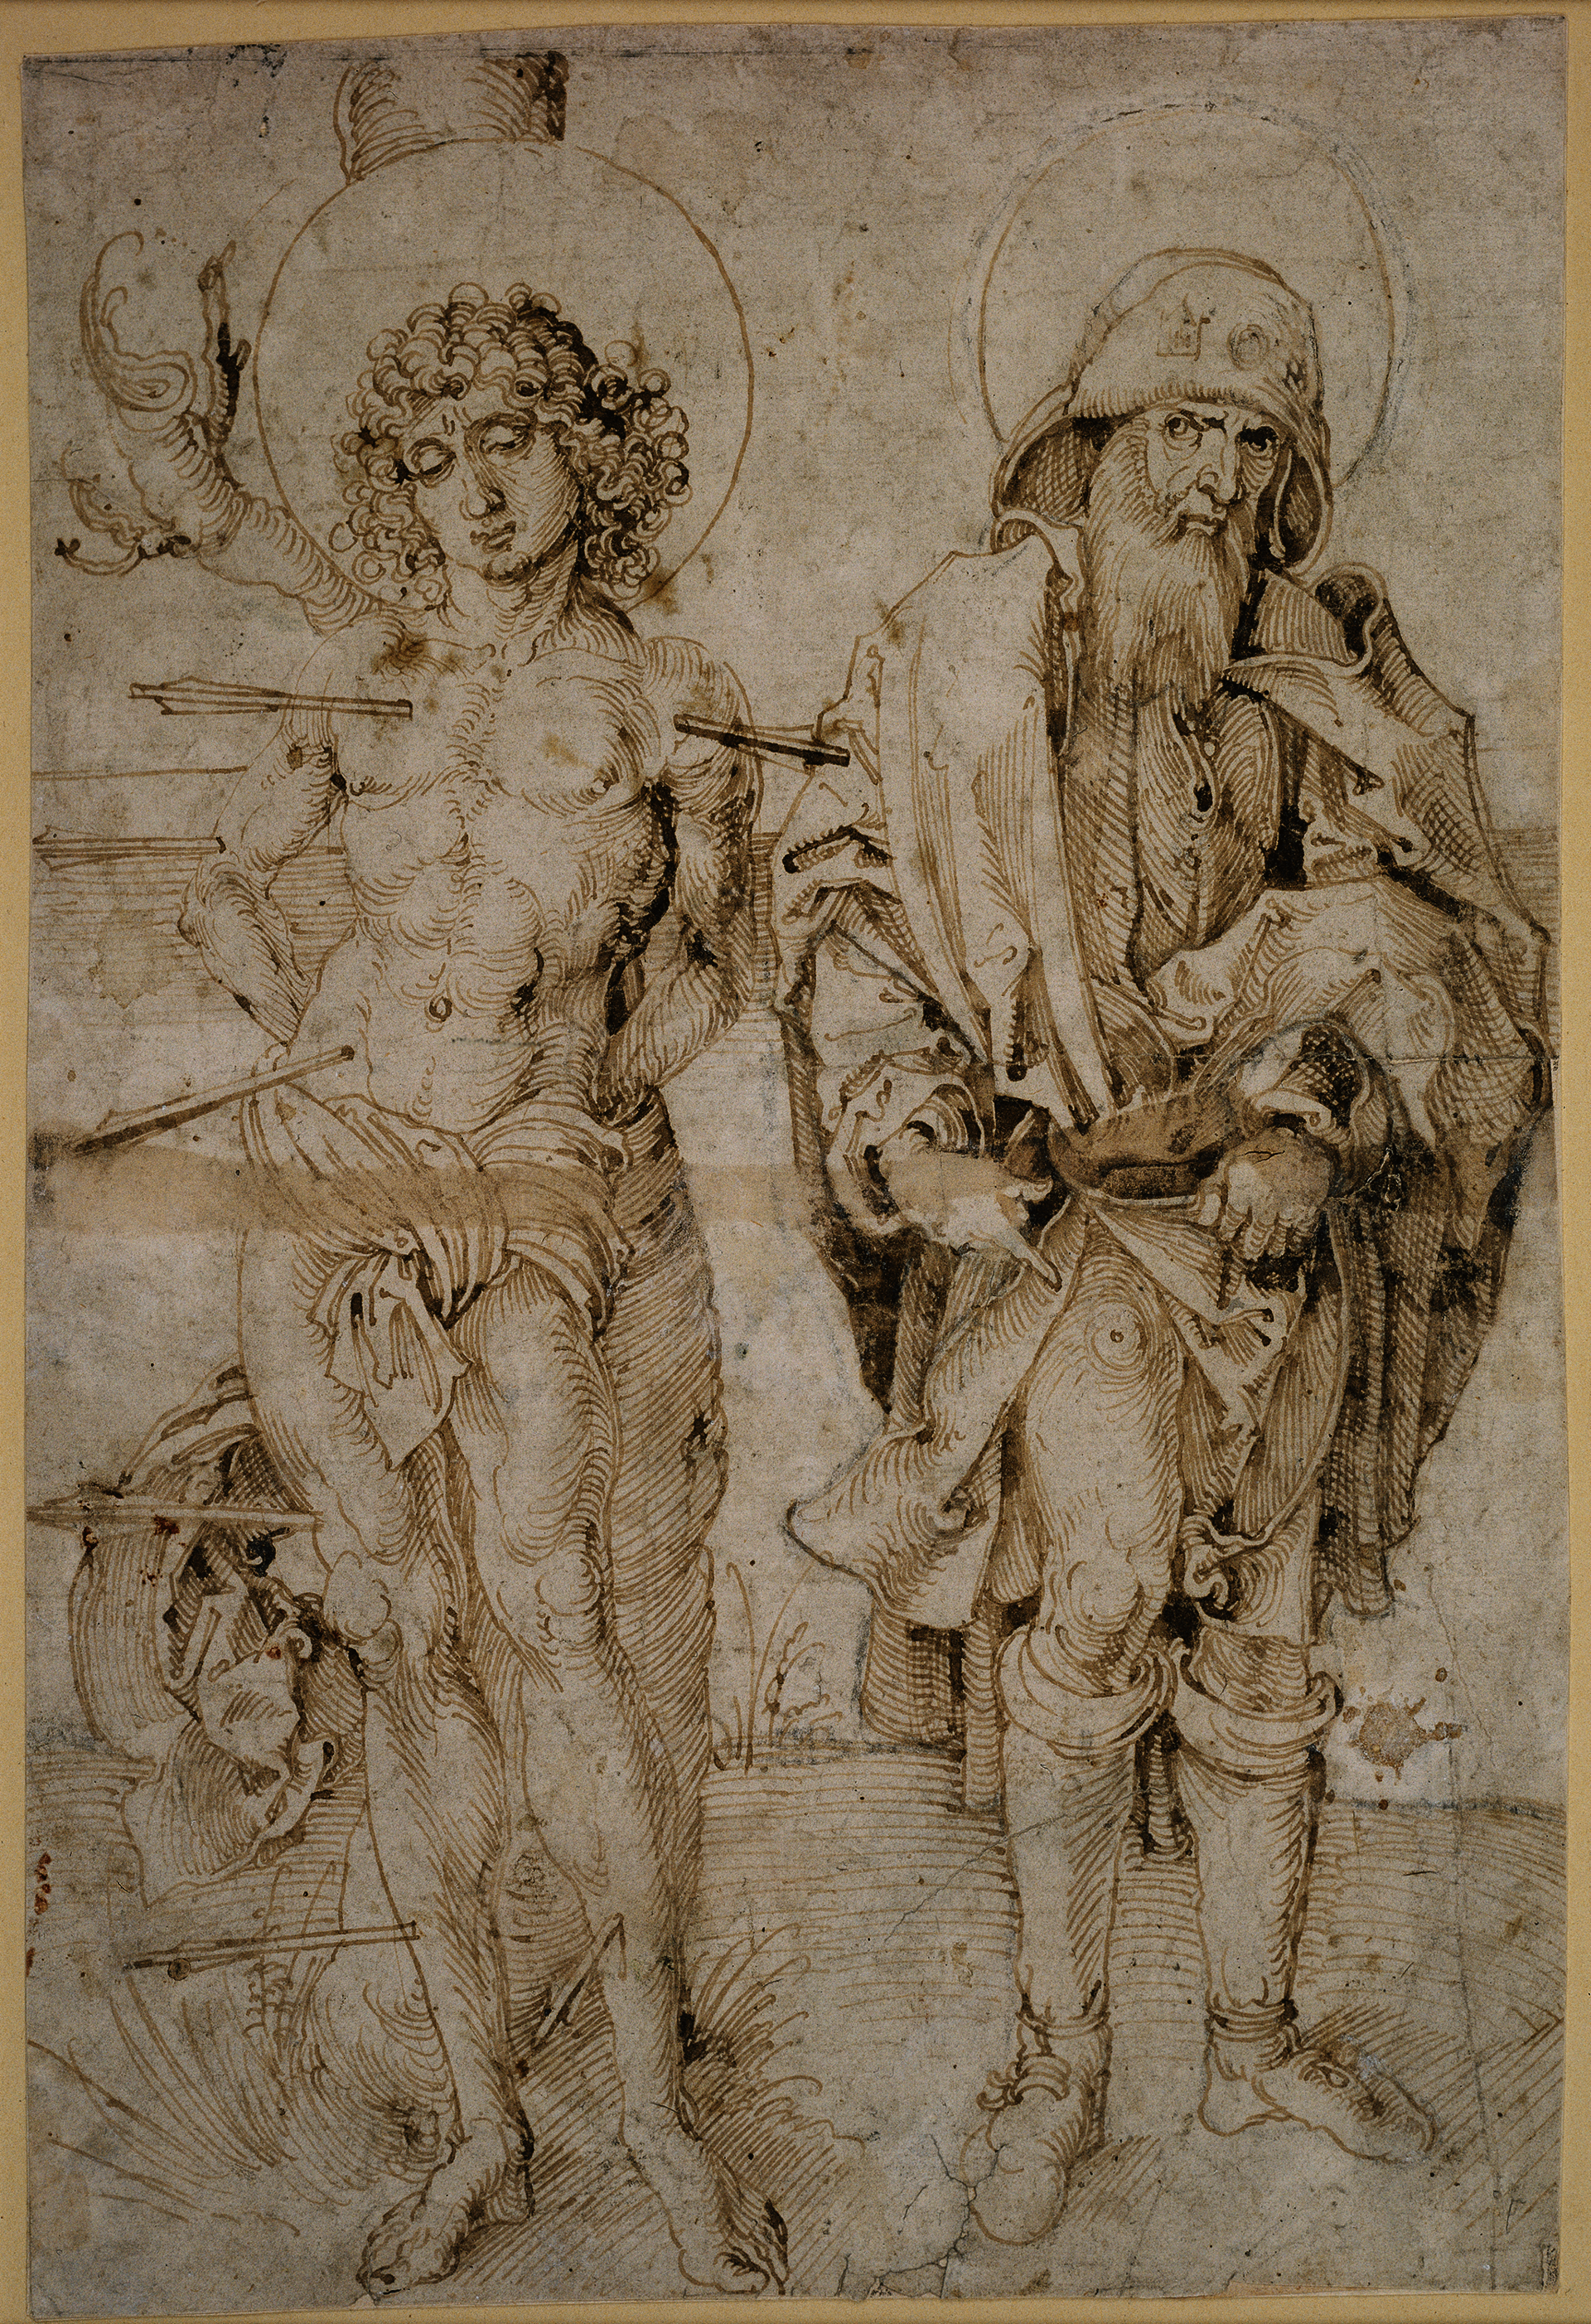 Brown-ink drawing of two men, both with halos. Figure at left is nearly nude and pierced with arrows. Figure at right parts his cloak to reveal his injured thigh.